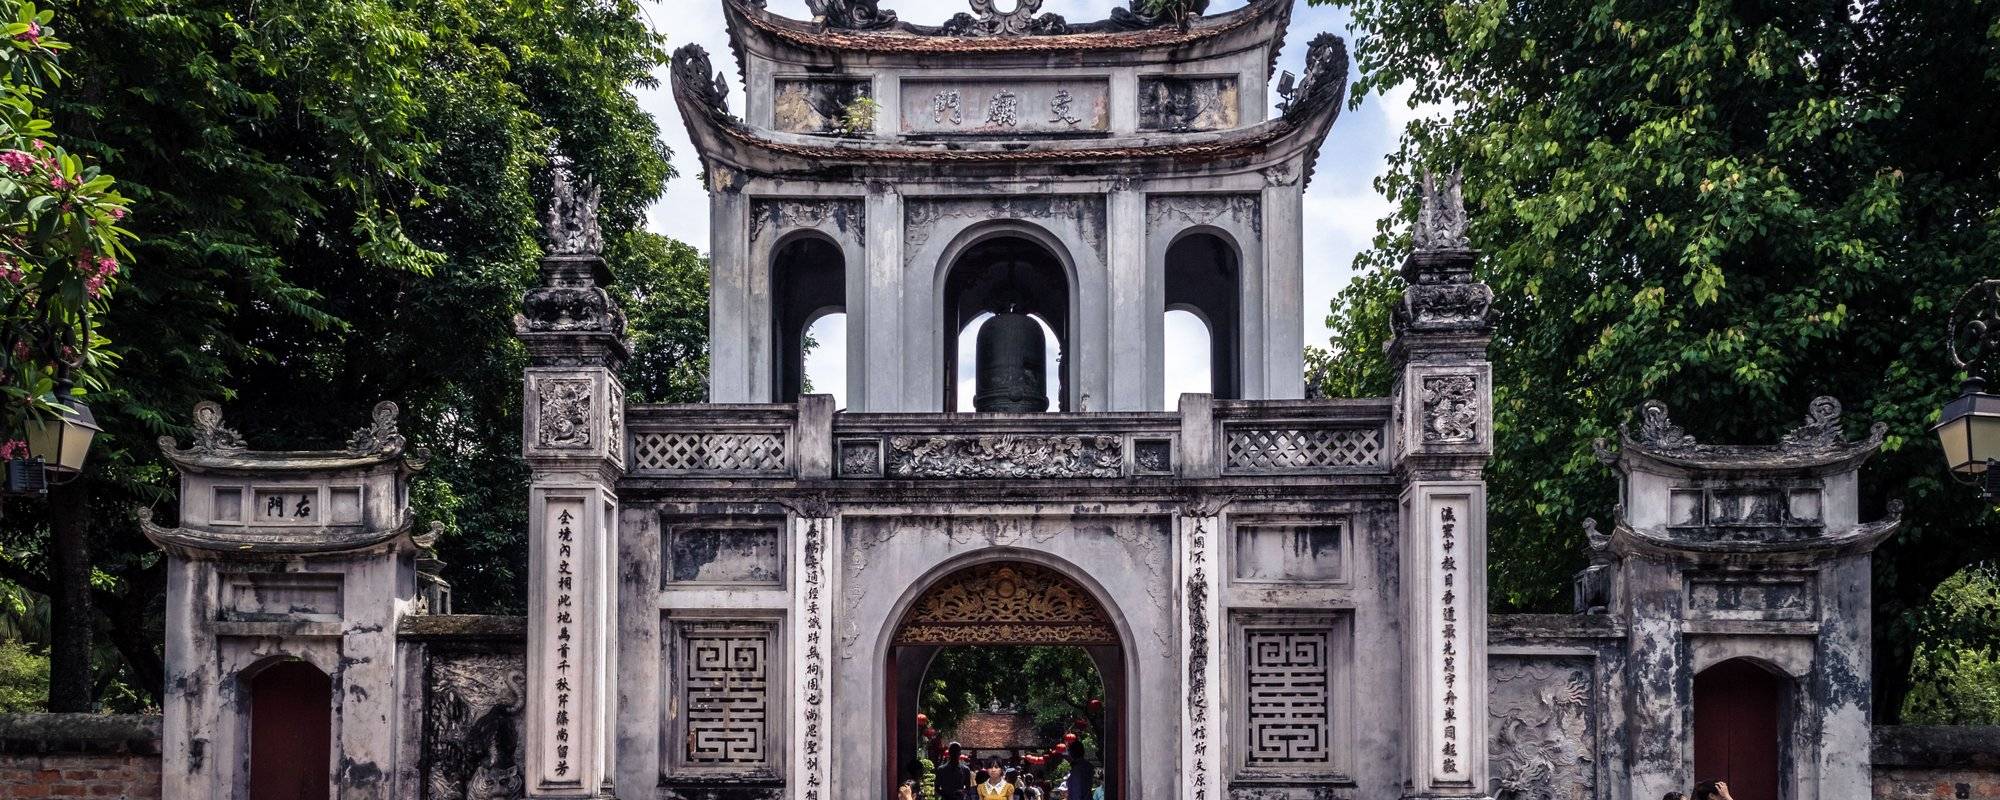 What to do in Hanoi: TRAVELTIPS for the capital of Vietnam